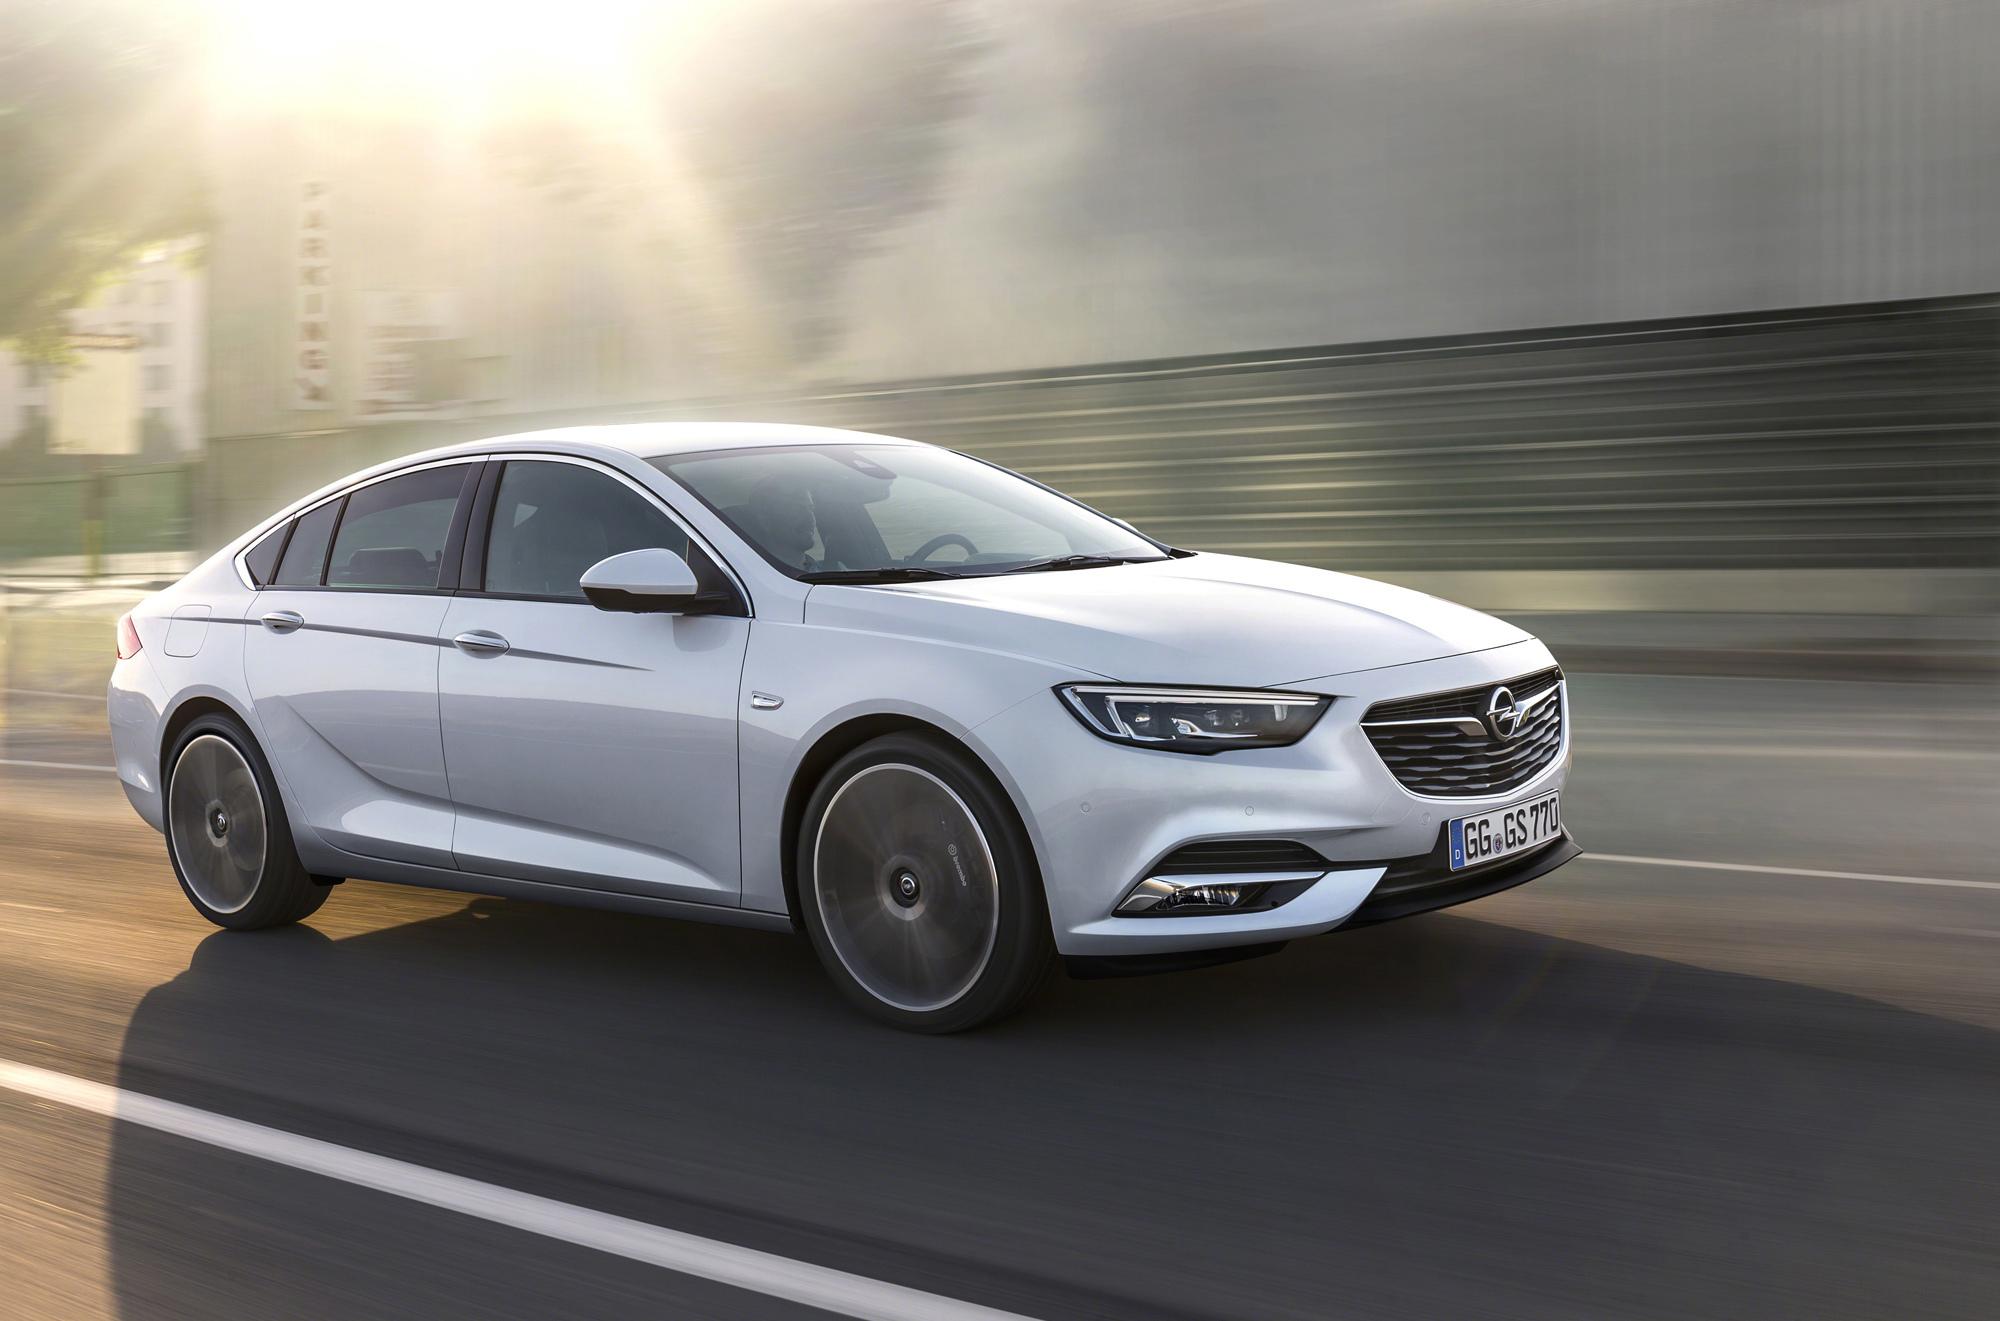 Opel Insignia Wallpaper HD Photo, Wallpaper and other Image